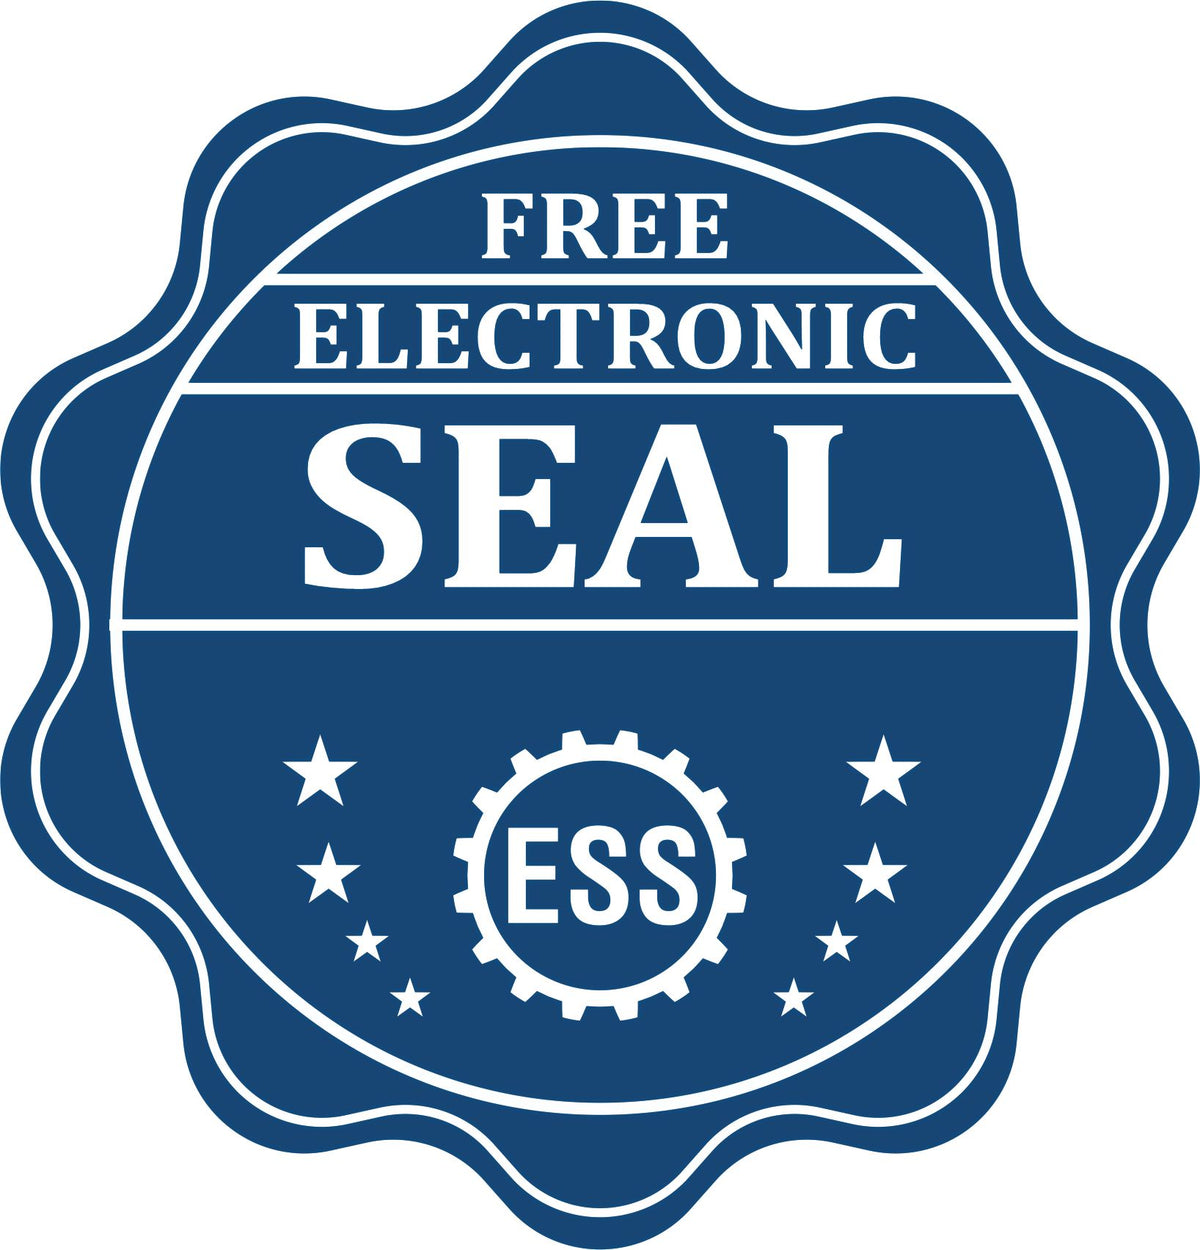 A badge showing a free electronic seal for the Heavy Duty Cast Iron Connecticut Engineer Seal Embosser with stars and the ESS gear on the emblem.